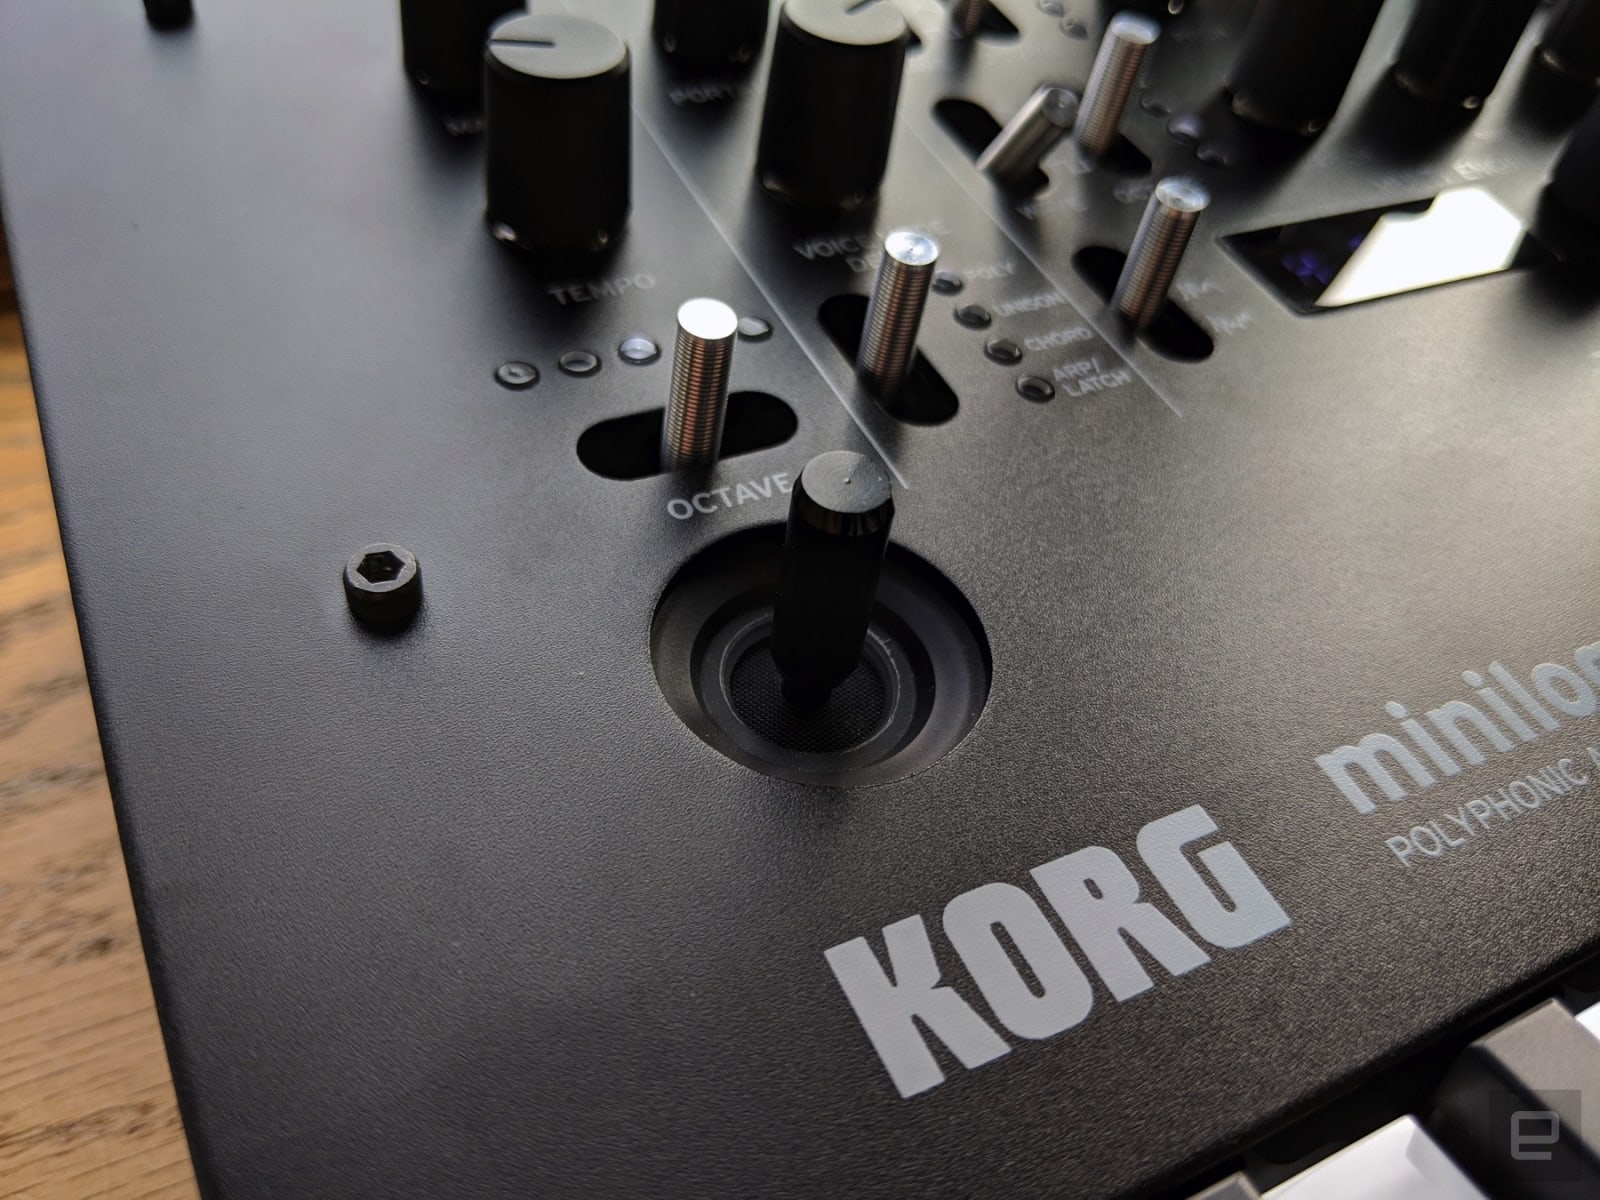 Korg Minilogue XD review